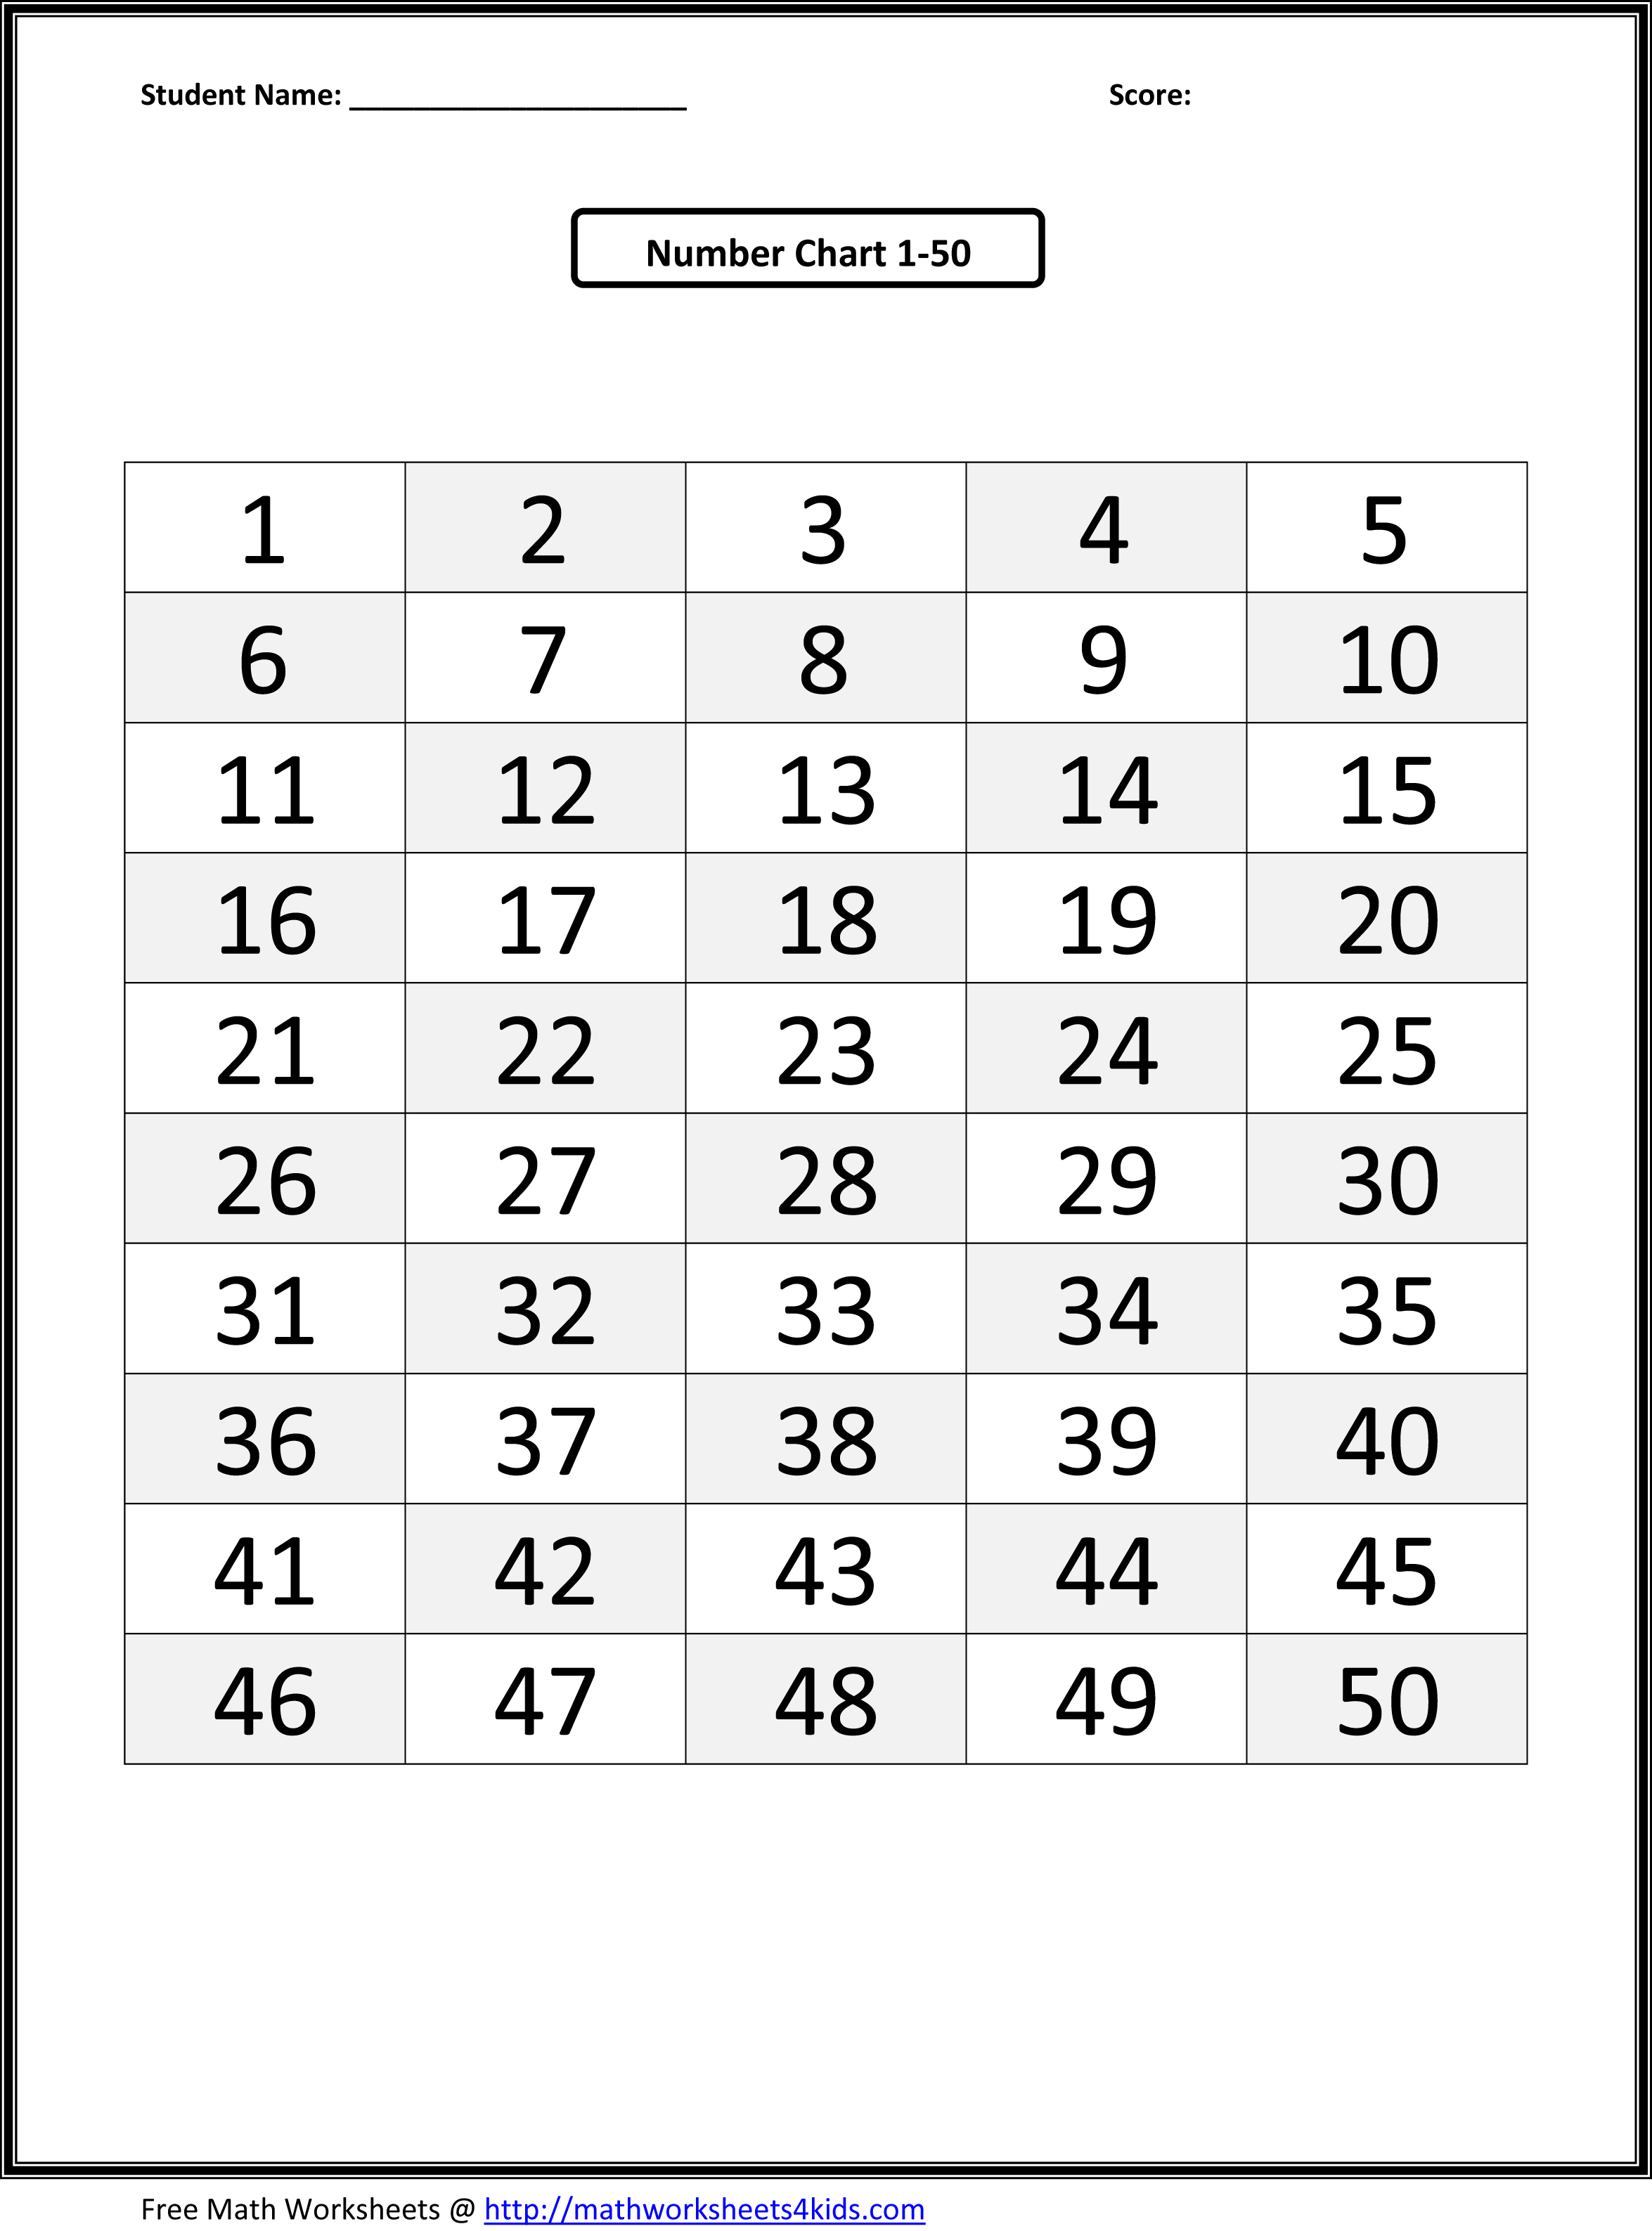 Math Worksheets Numbers 1 50